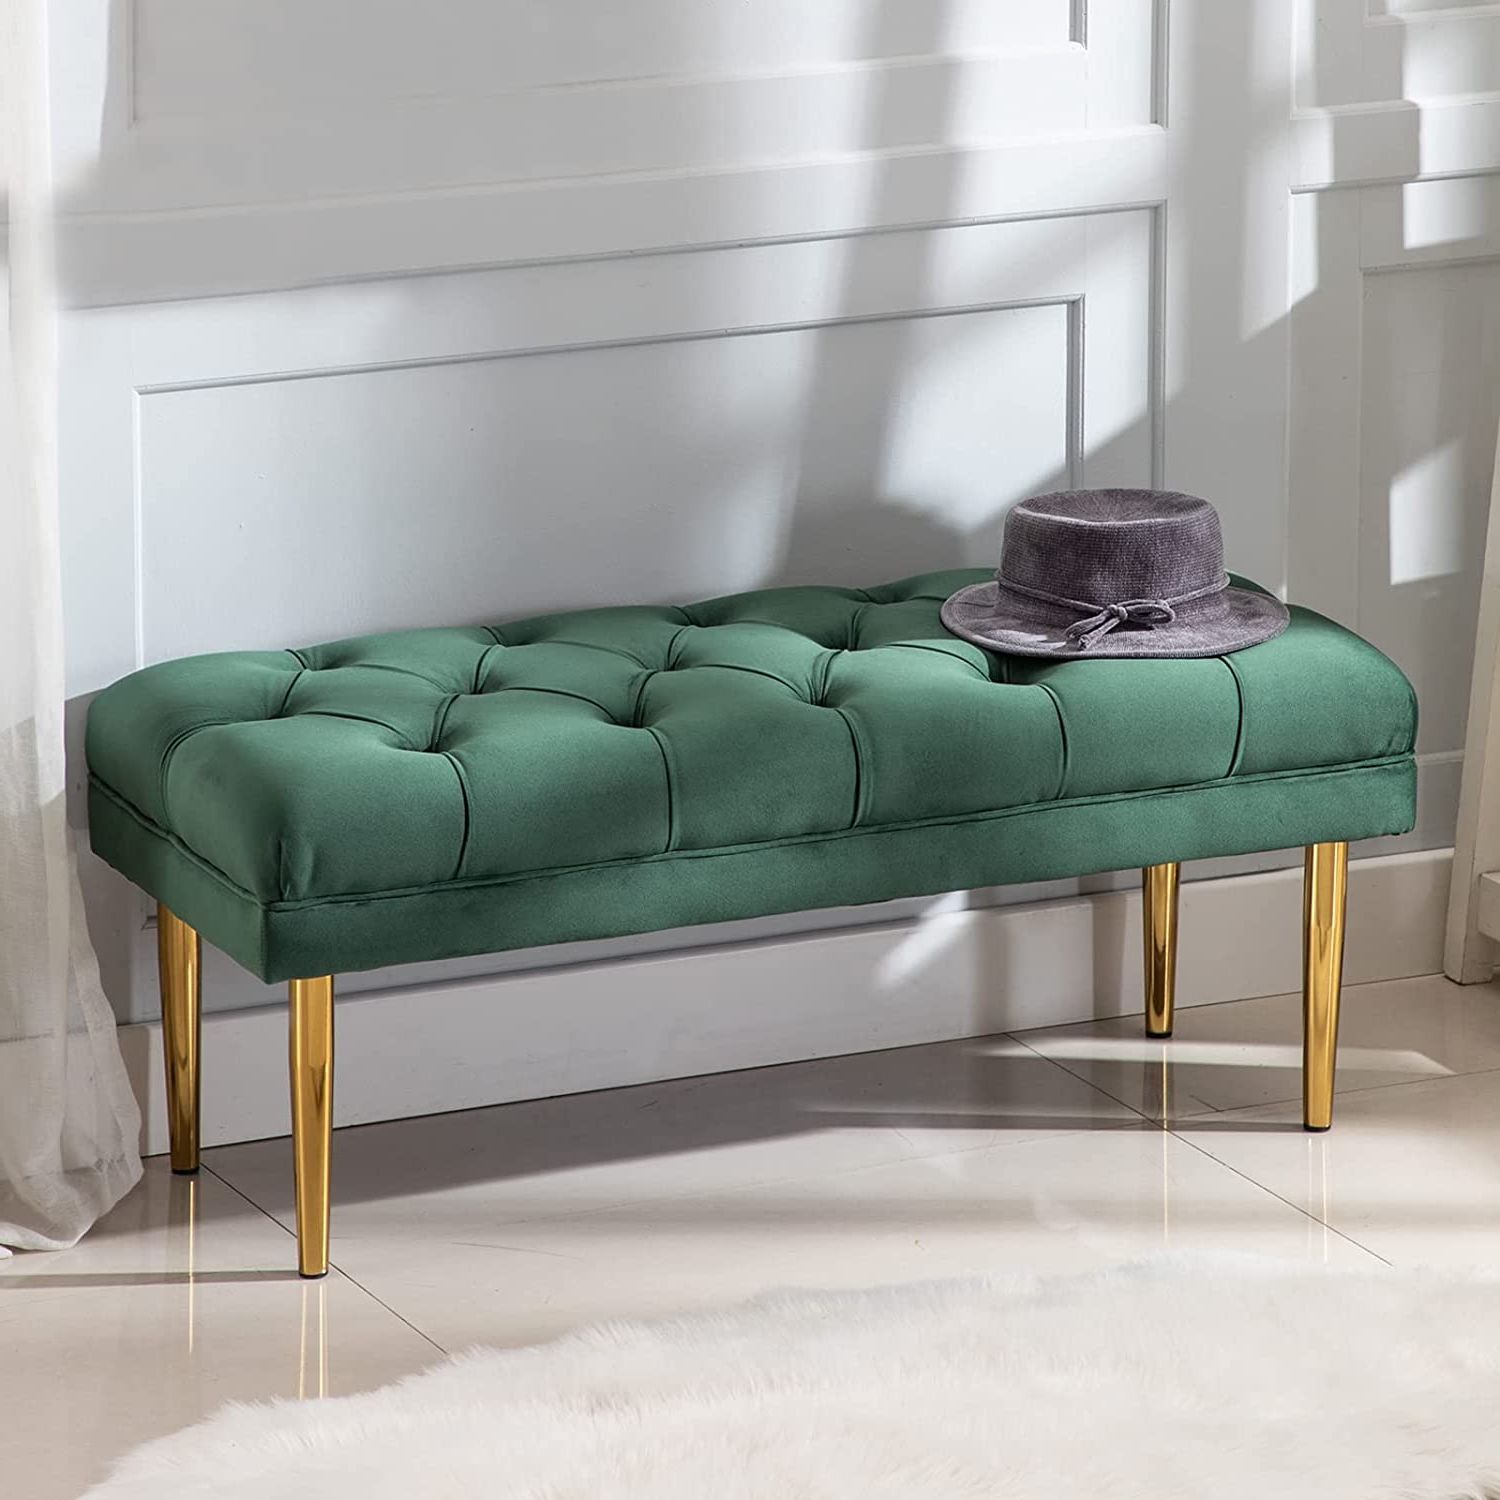 Widely Used Wahson Velvet Ottoman Bench Seat Upholstered Bed End Stool Dining Bench  With Golden Metal Legs, Window Seat Footstools For Entryway, Green :  Amazon.co (View 5 of 10)